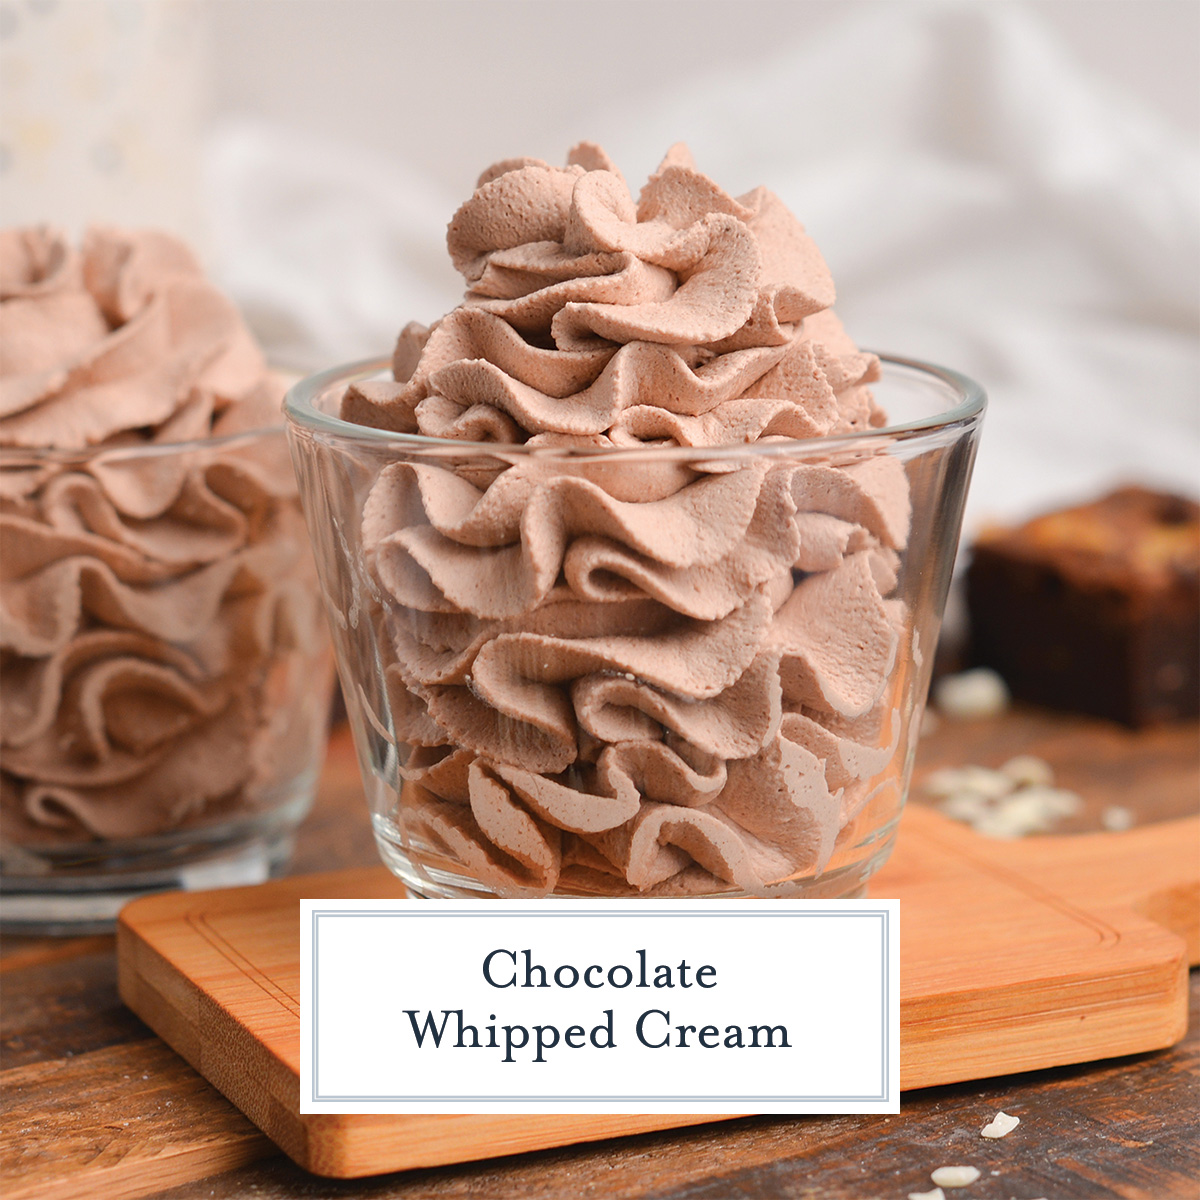 chocolate whipped cream with text overlay